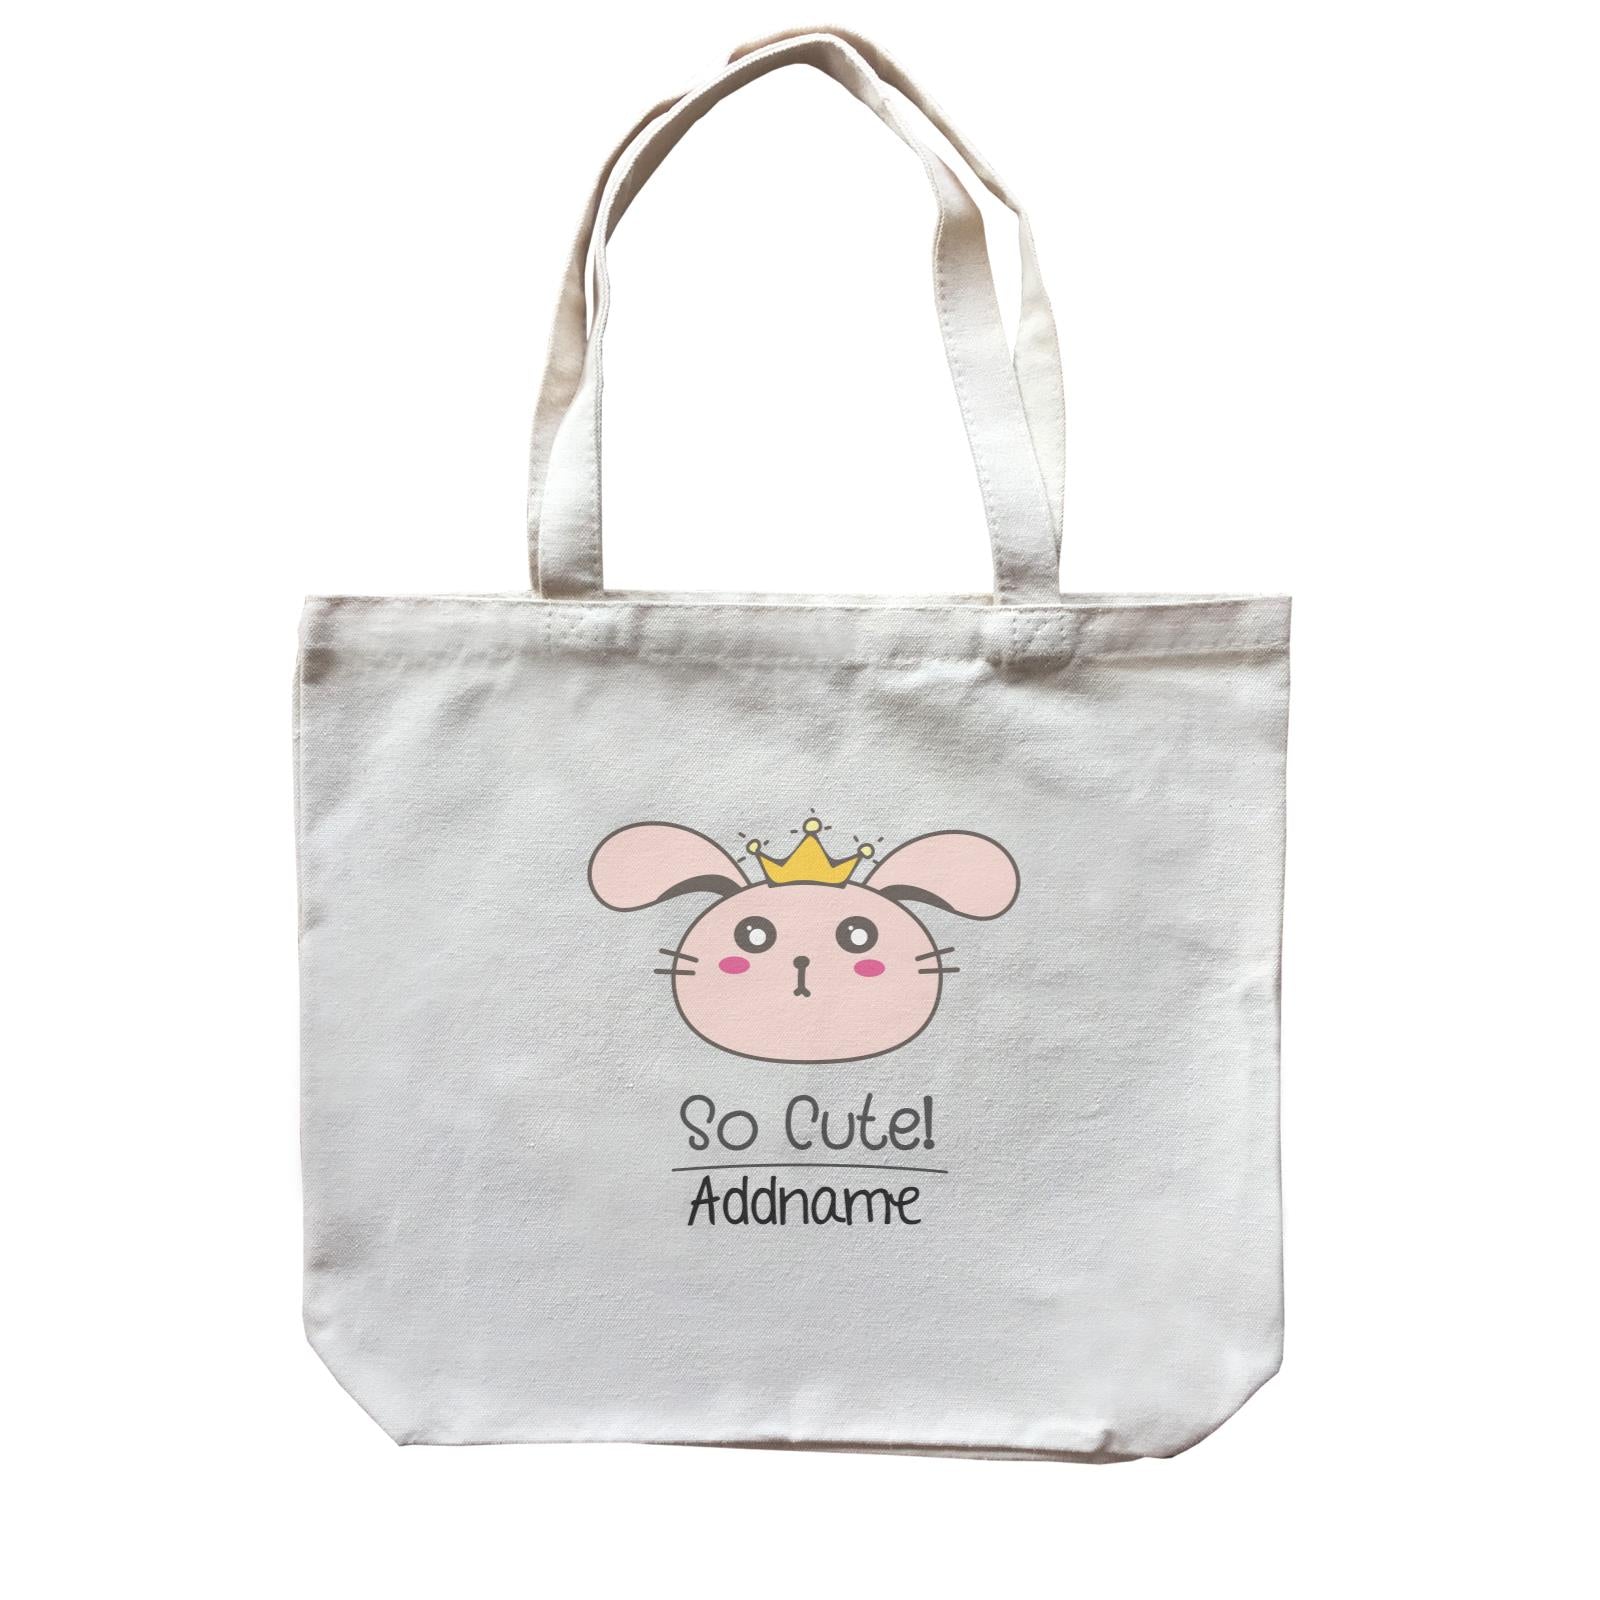 Cute Animals And Friends Series Cute Bunny With Crown Addname Canvas Bag